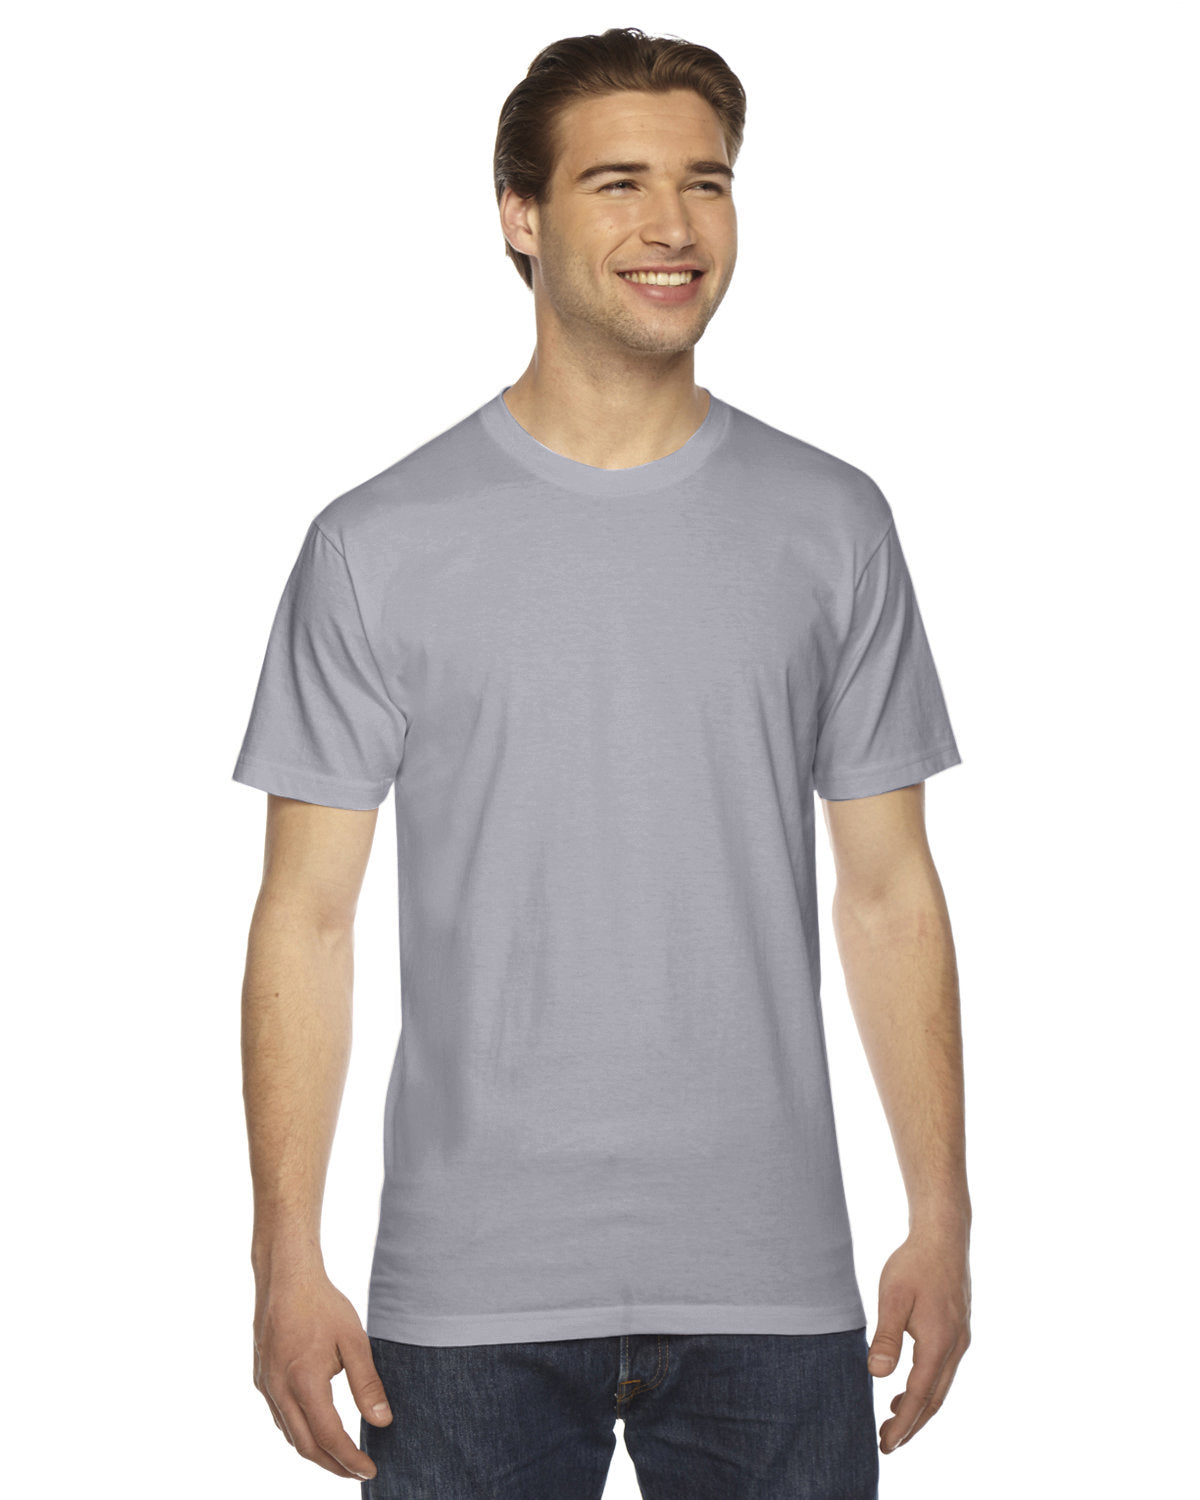 Slate t-shirt, front view.